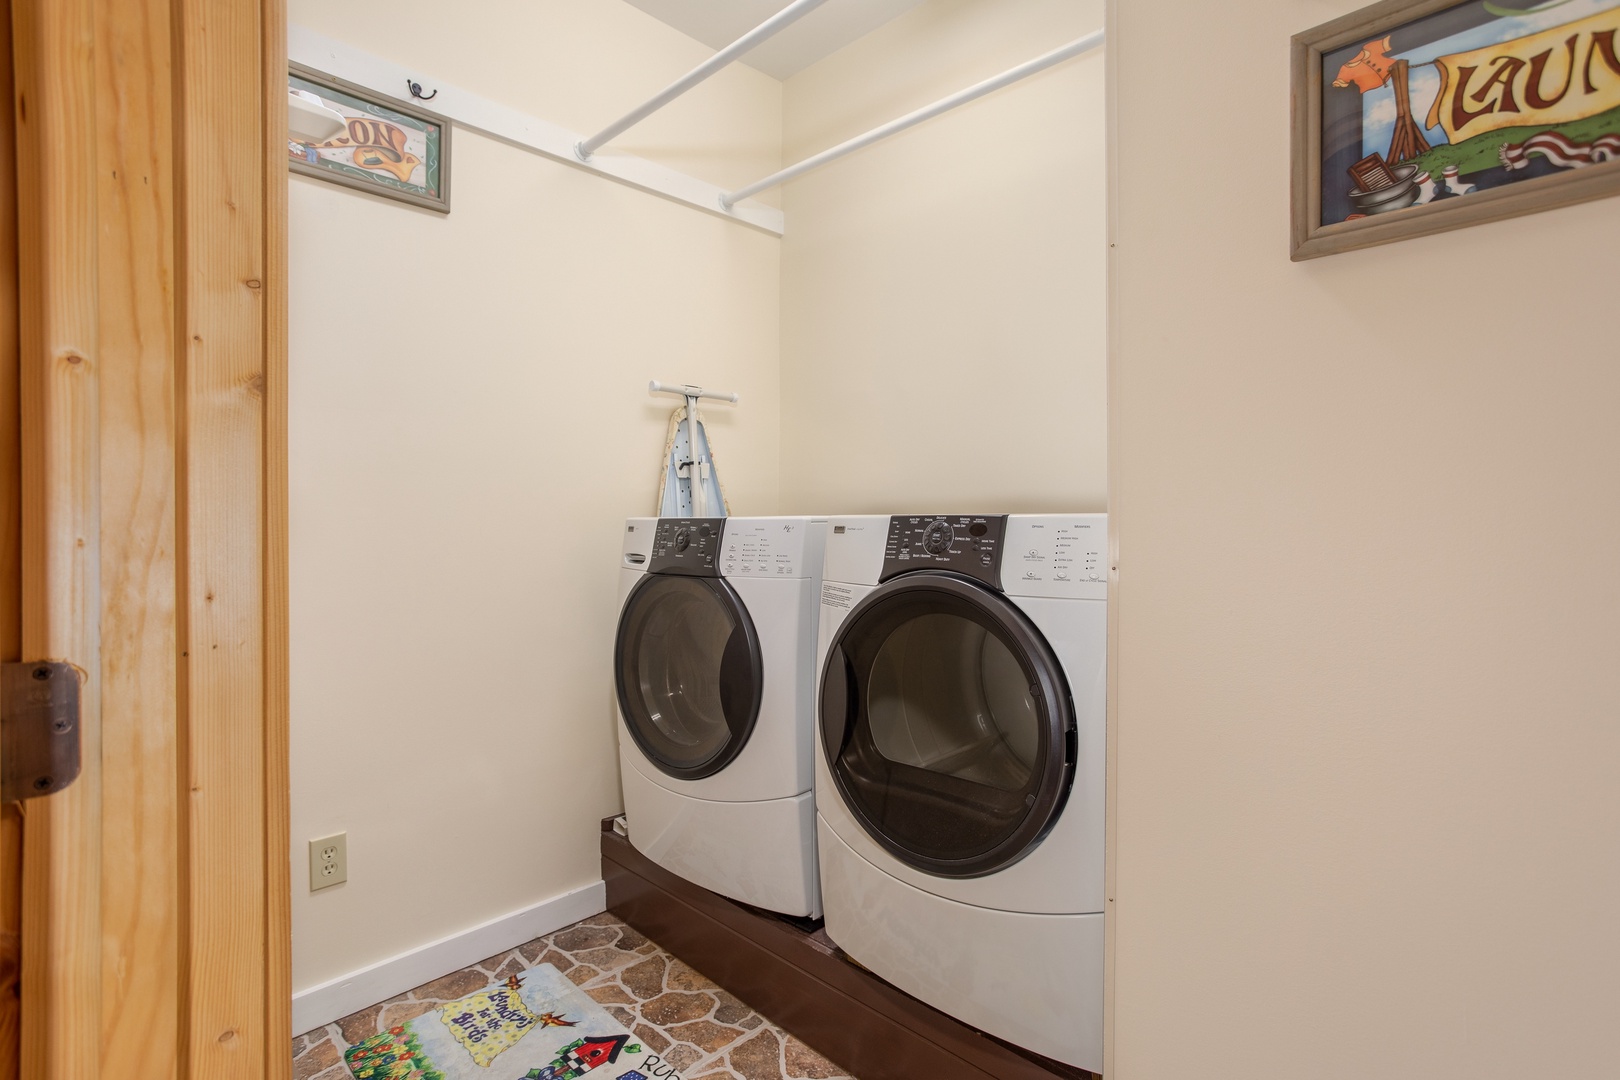 Laundry room at Great View Lodge, a 5-bedroom cabin rental located in Pigeon Forge